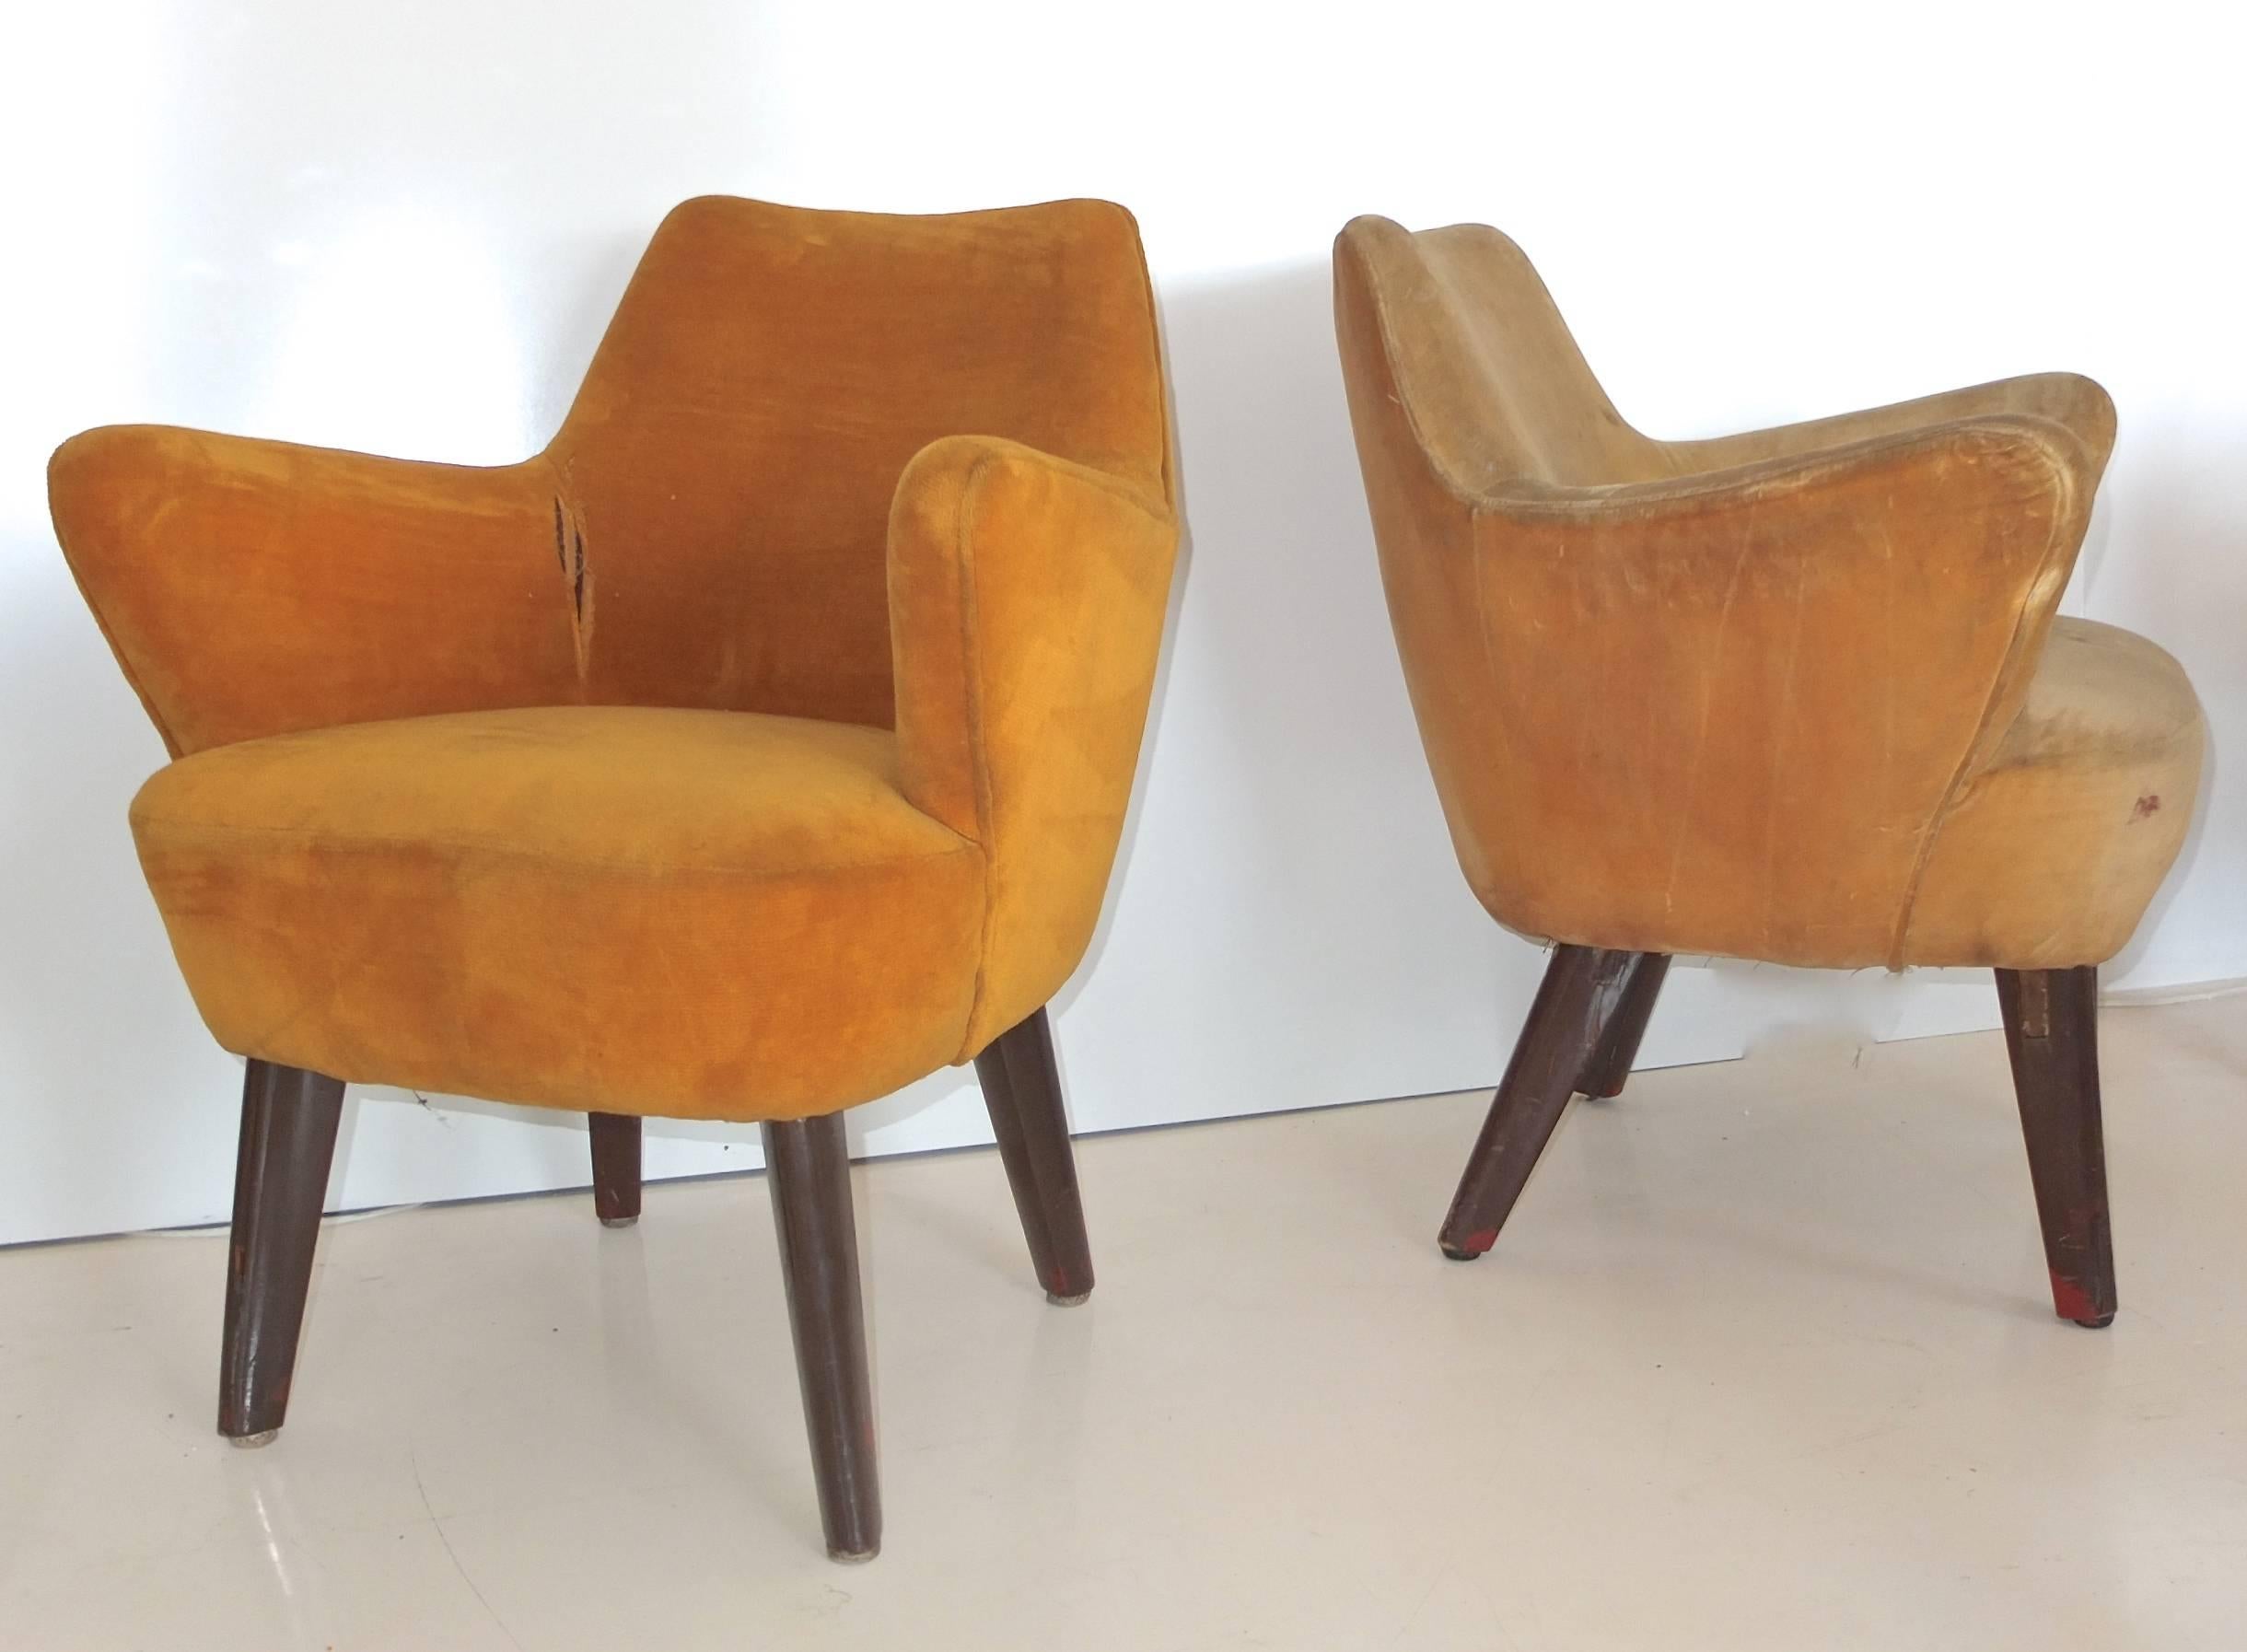 Italian Gio Ponti Chairs from Augustus Ocean Liner - Pairs X3 For Sale